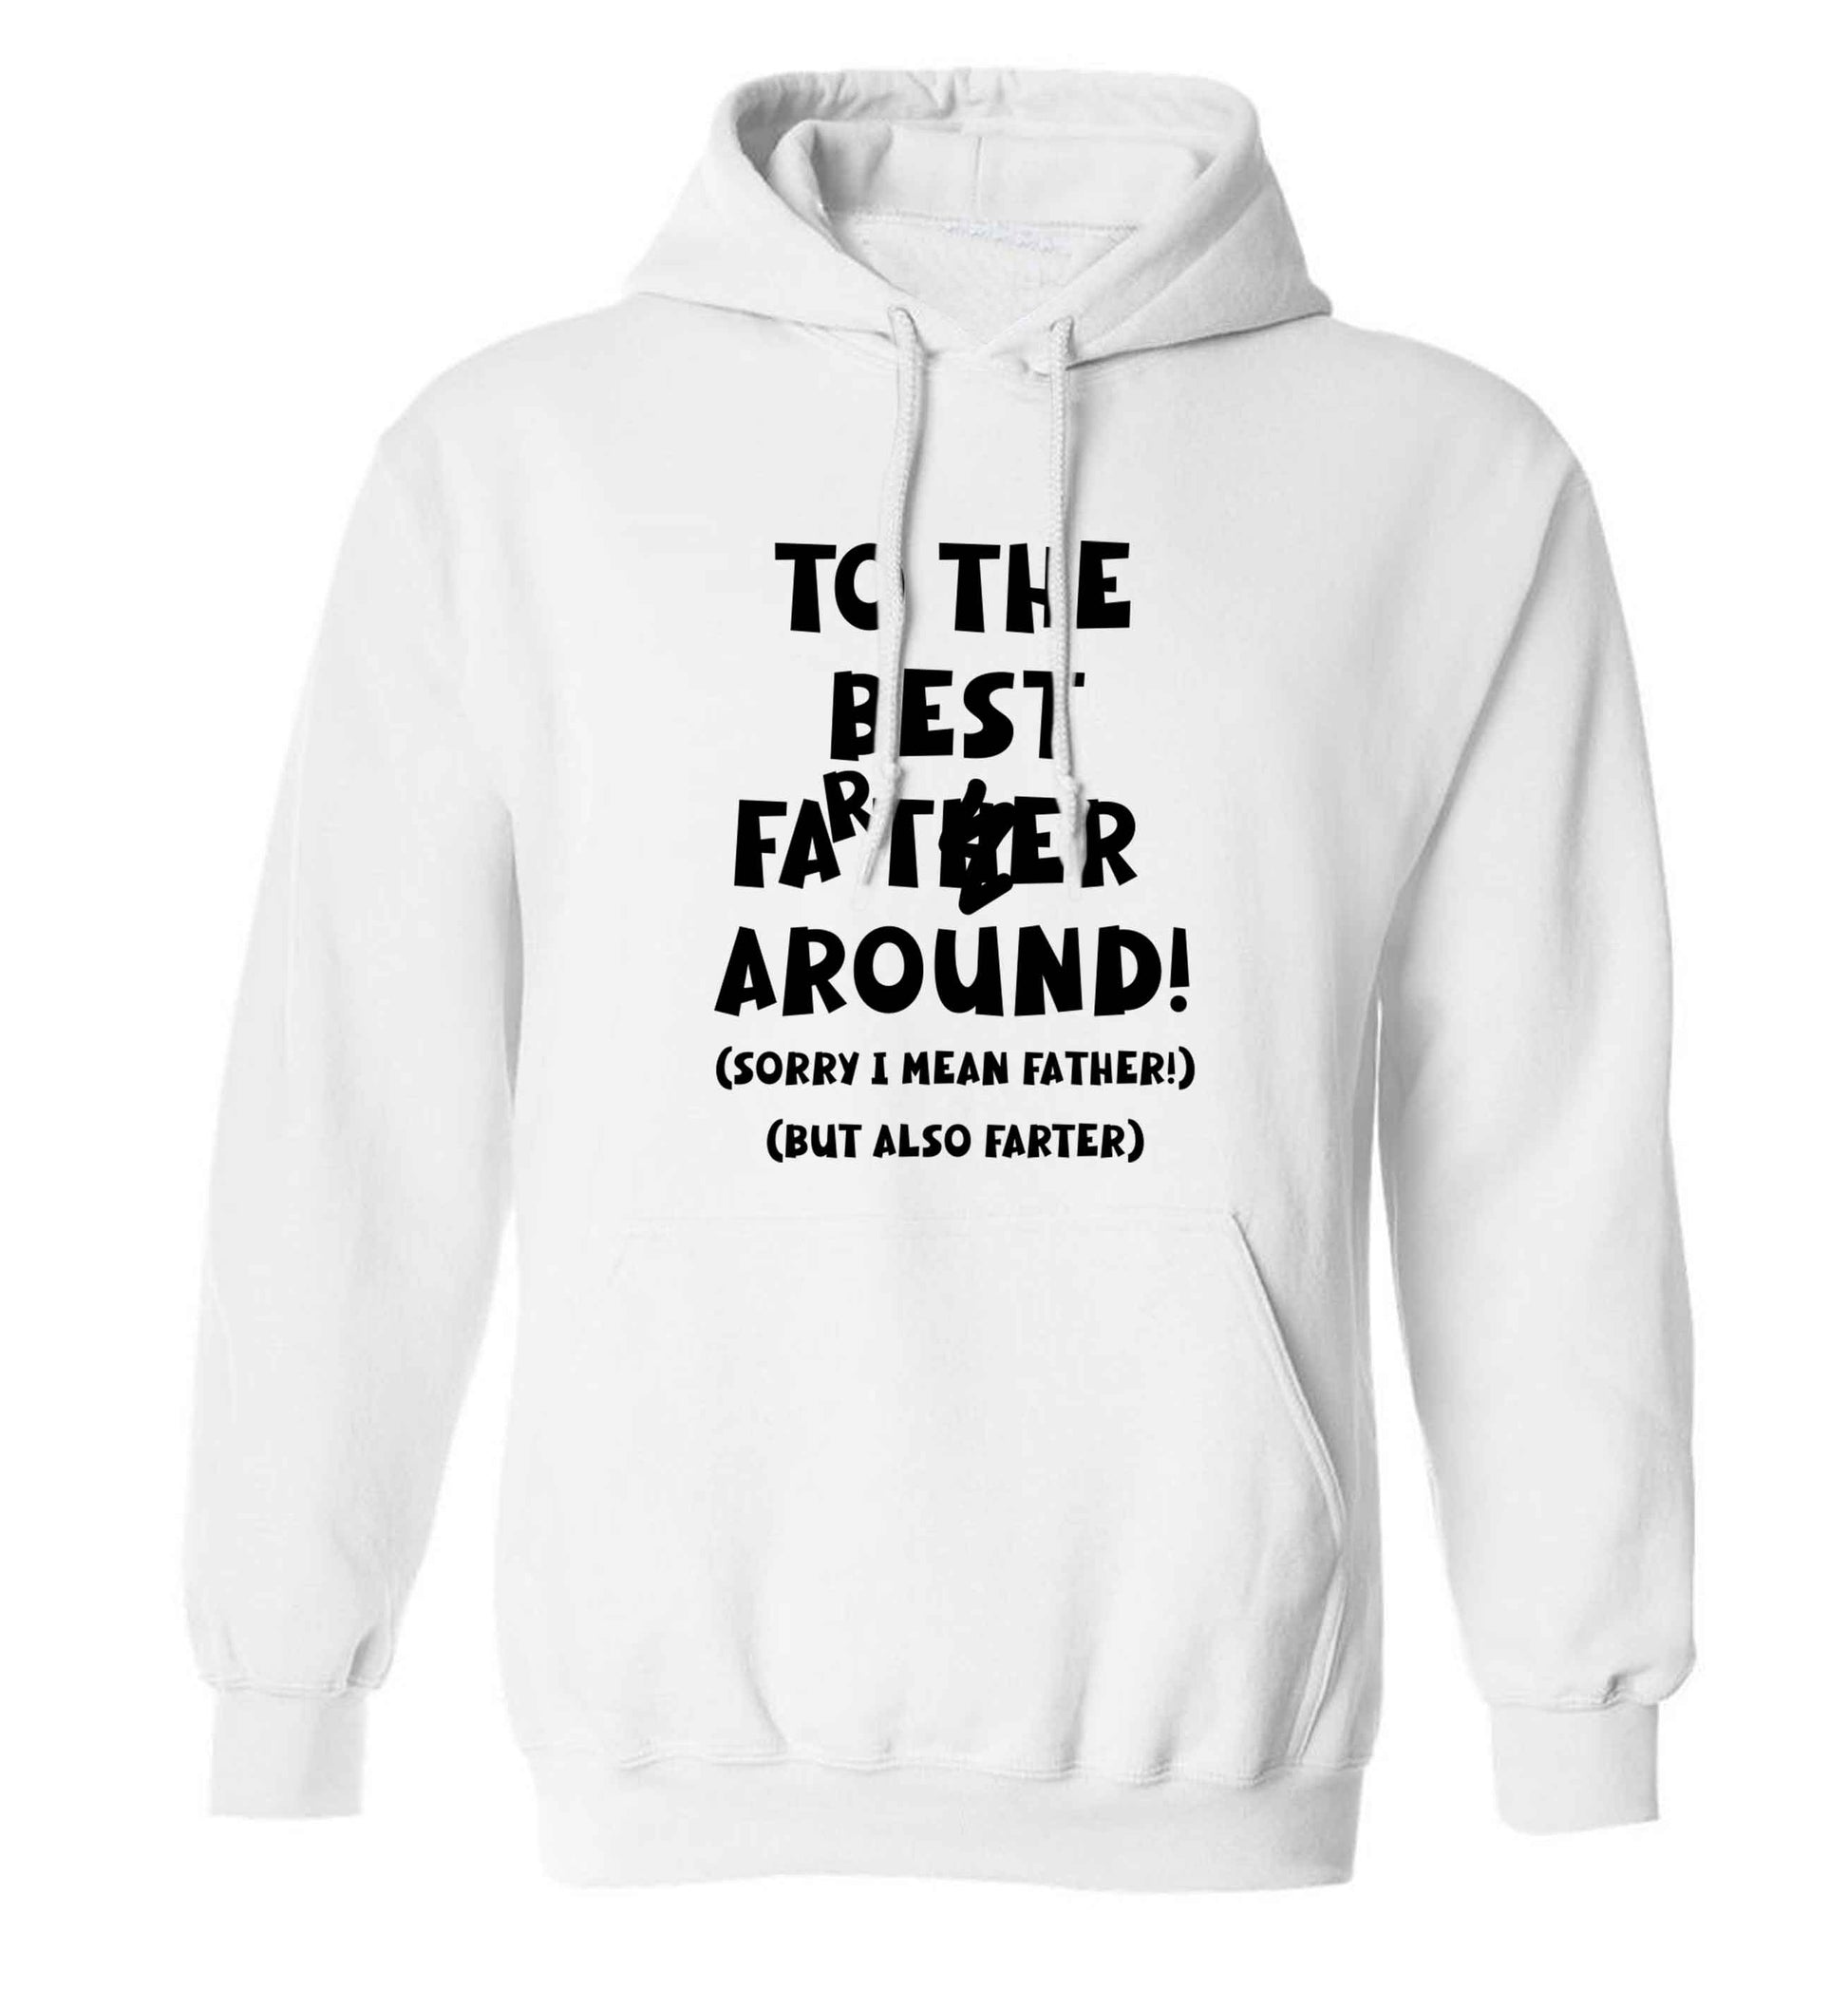 To the best farter around! Sorry I mean father, but also farter adults unisex white hoodie 2XL